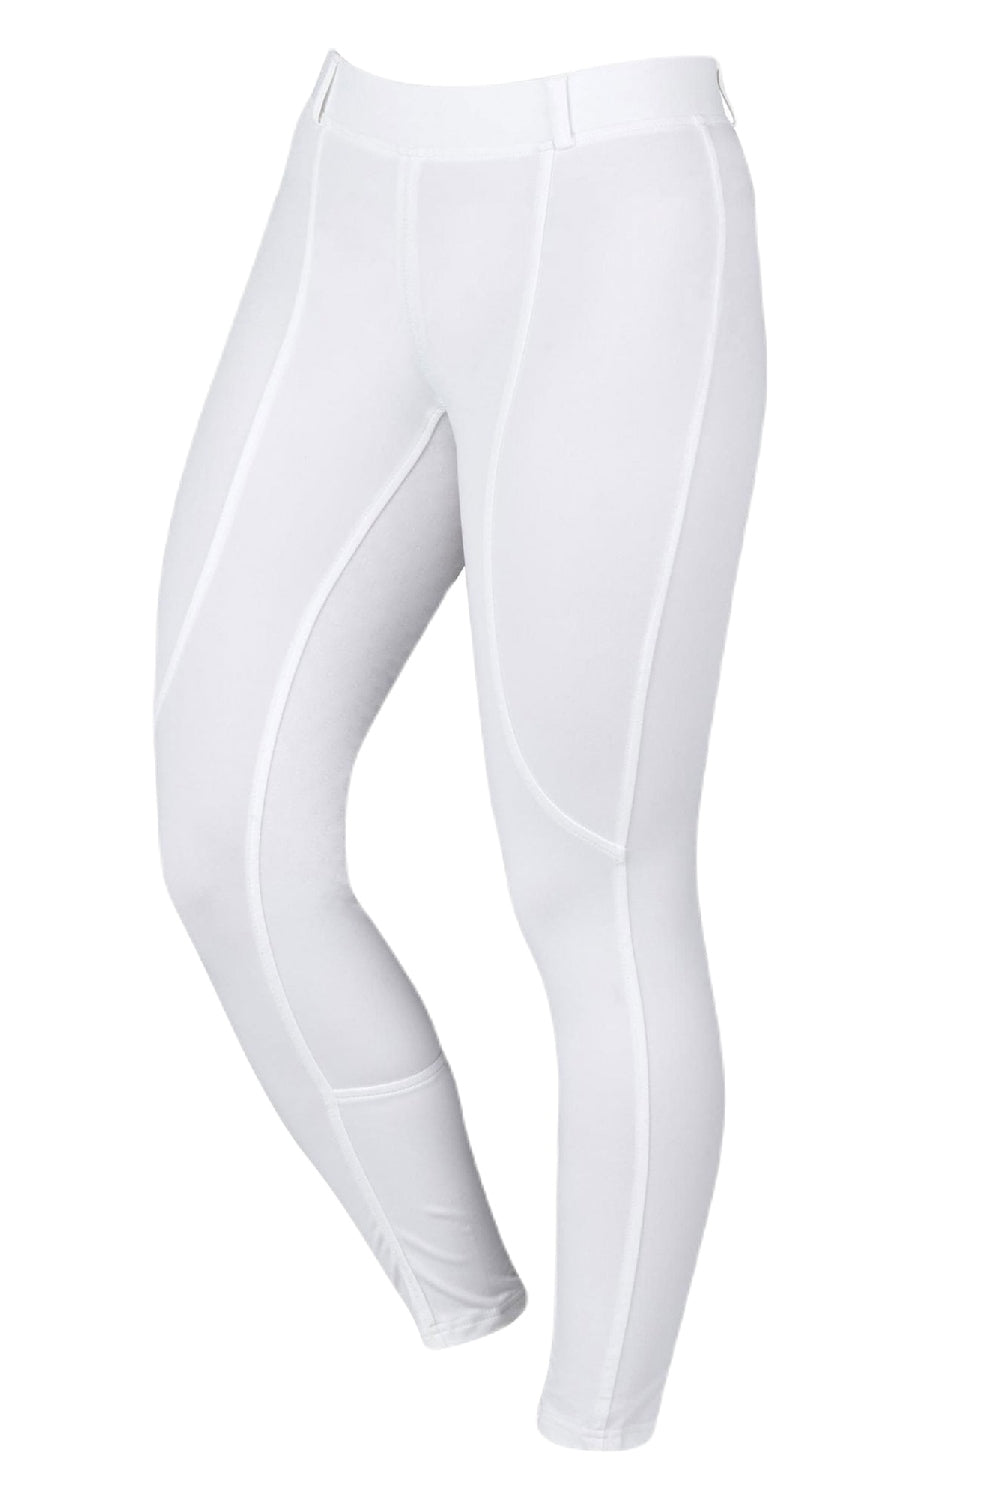 Dublin Performance Cool-It Gel Riding Tights in White 